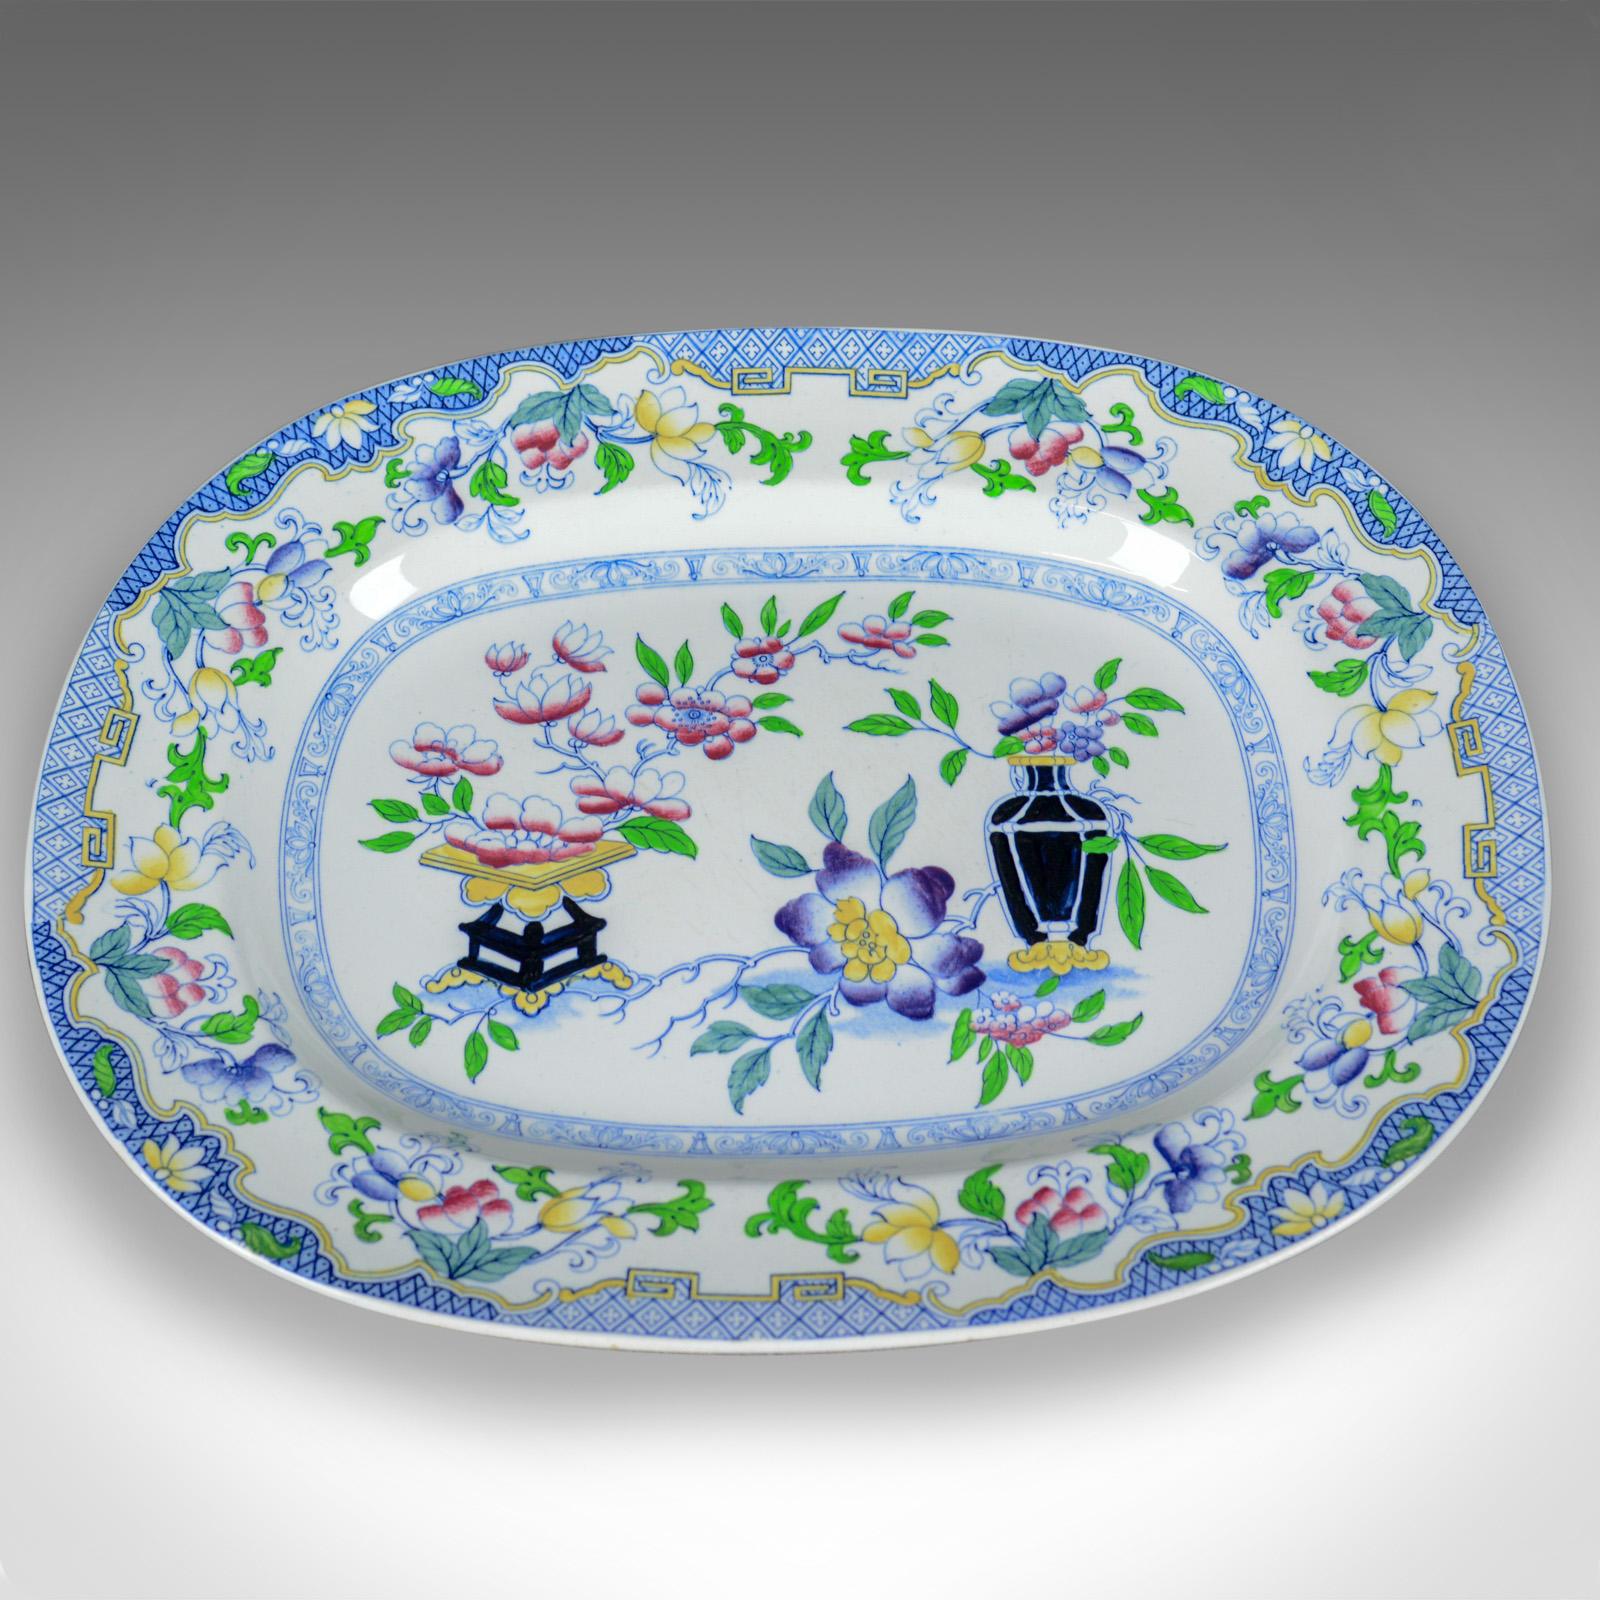 This is a pair of Mintons ovular serving plates, English, early 20th century ceramic dishes.

An attractive pair of serving plates
Mintons marks to the base
in good condition throughout
Painted with a floral scene with vases
Predominantly blue